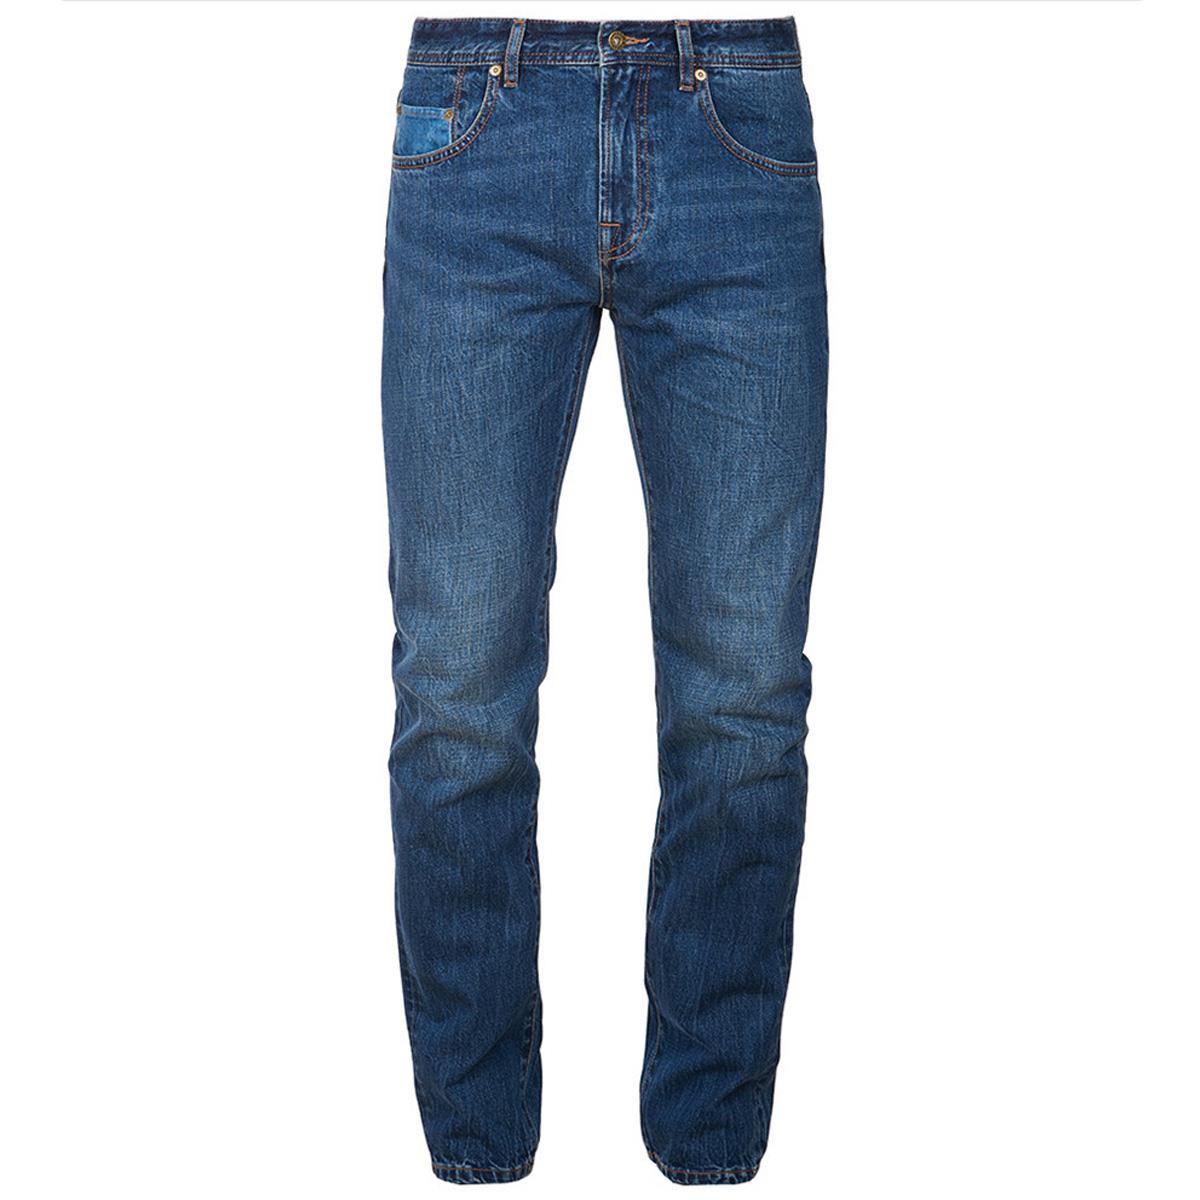 What is the reference code for these Barbour mens jeans?